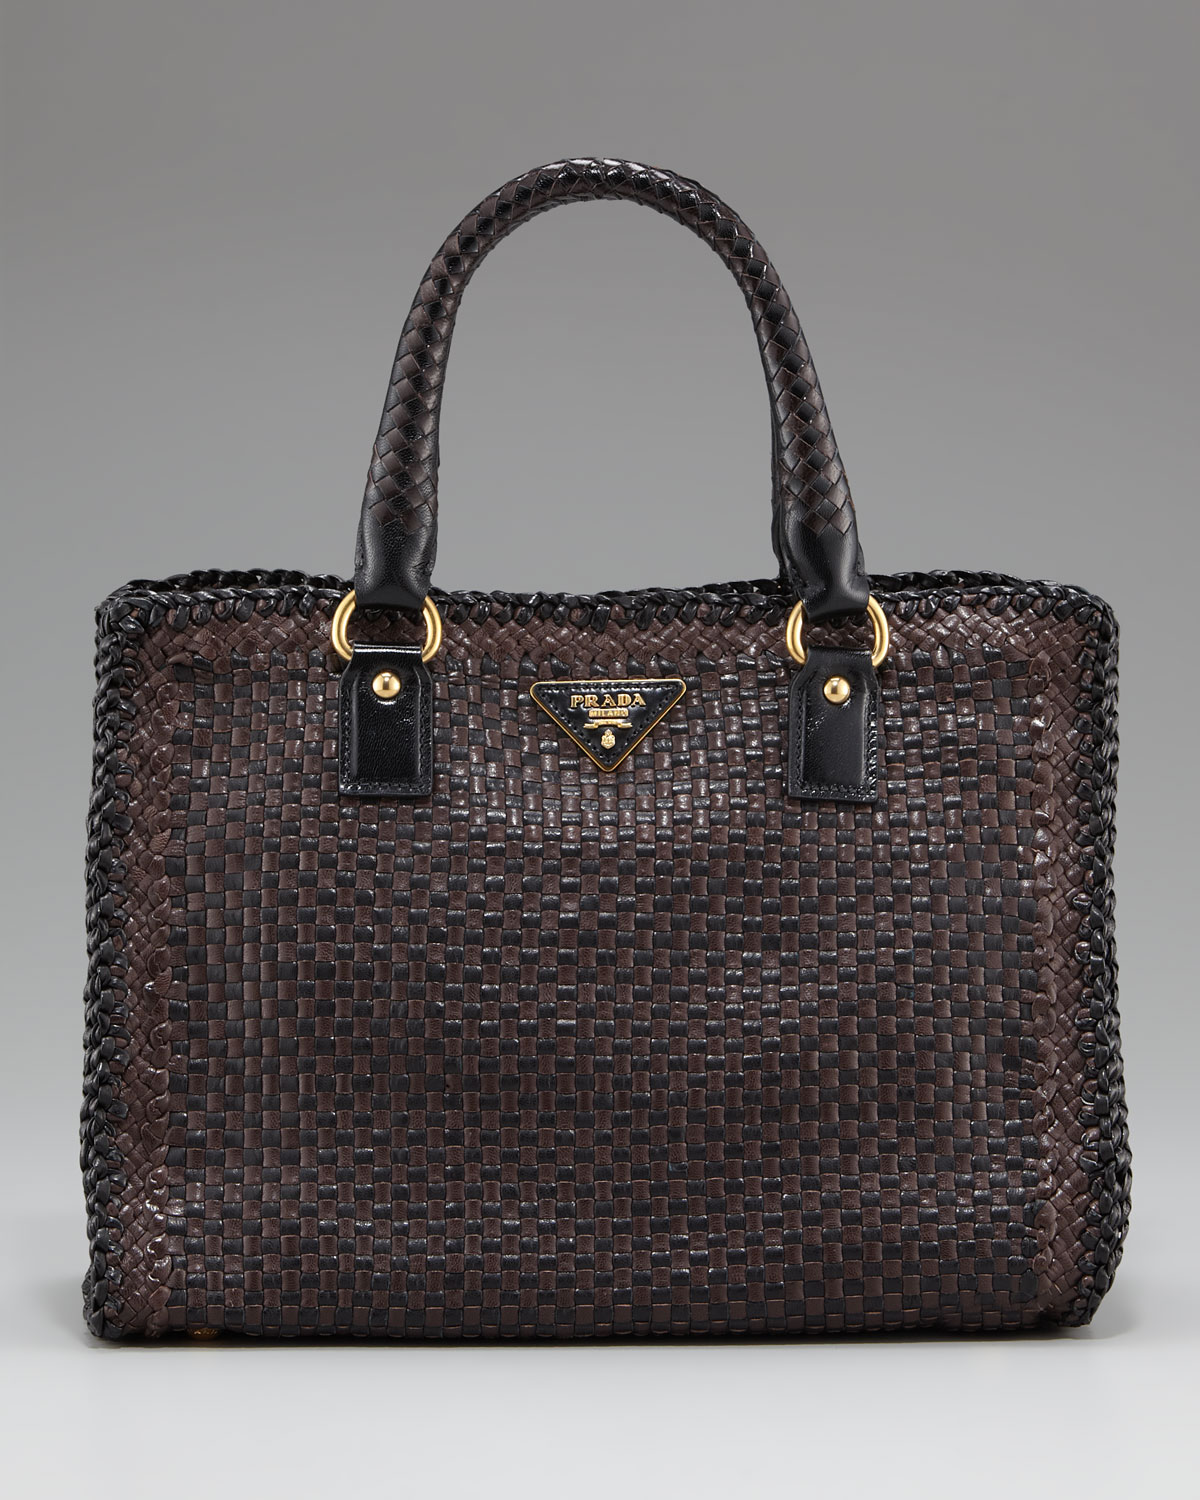 Prada Madras Woven Double-handle Tote in Brown - Lyst